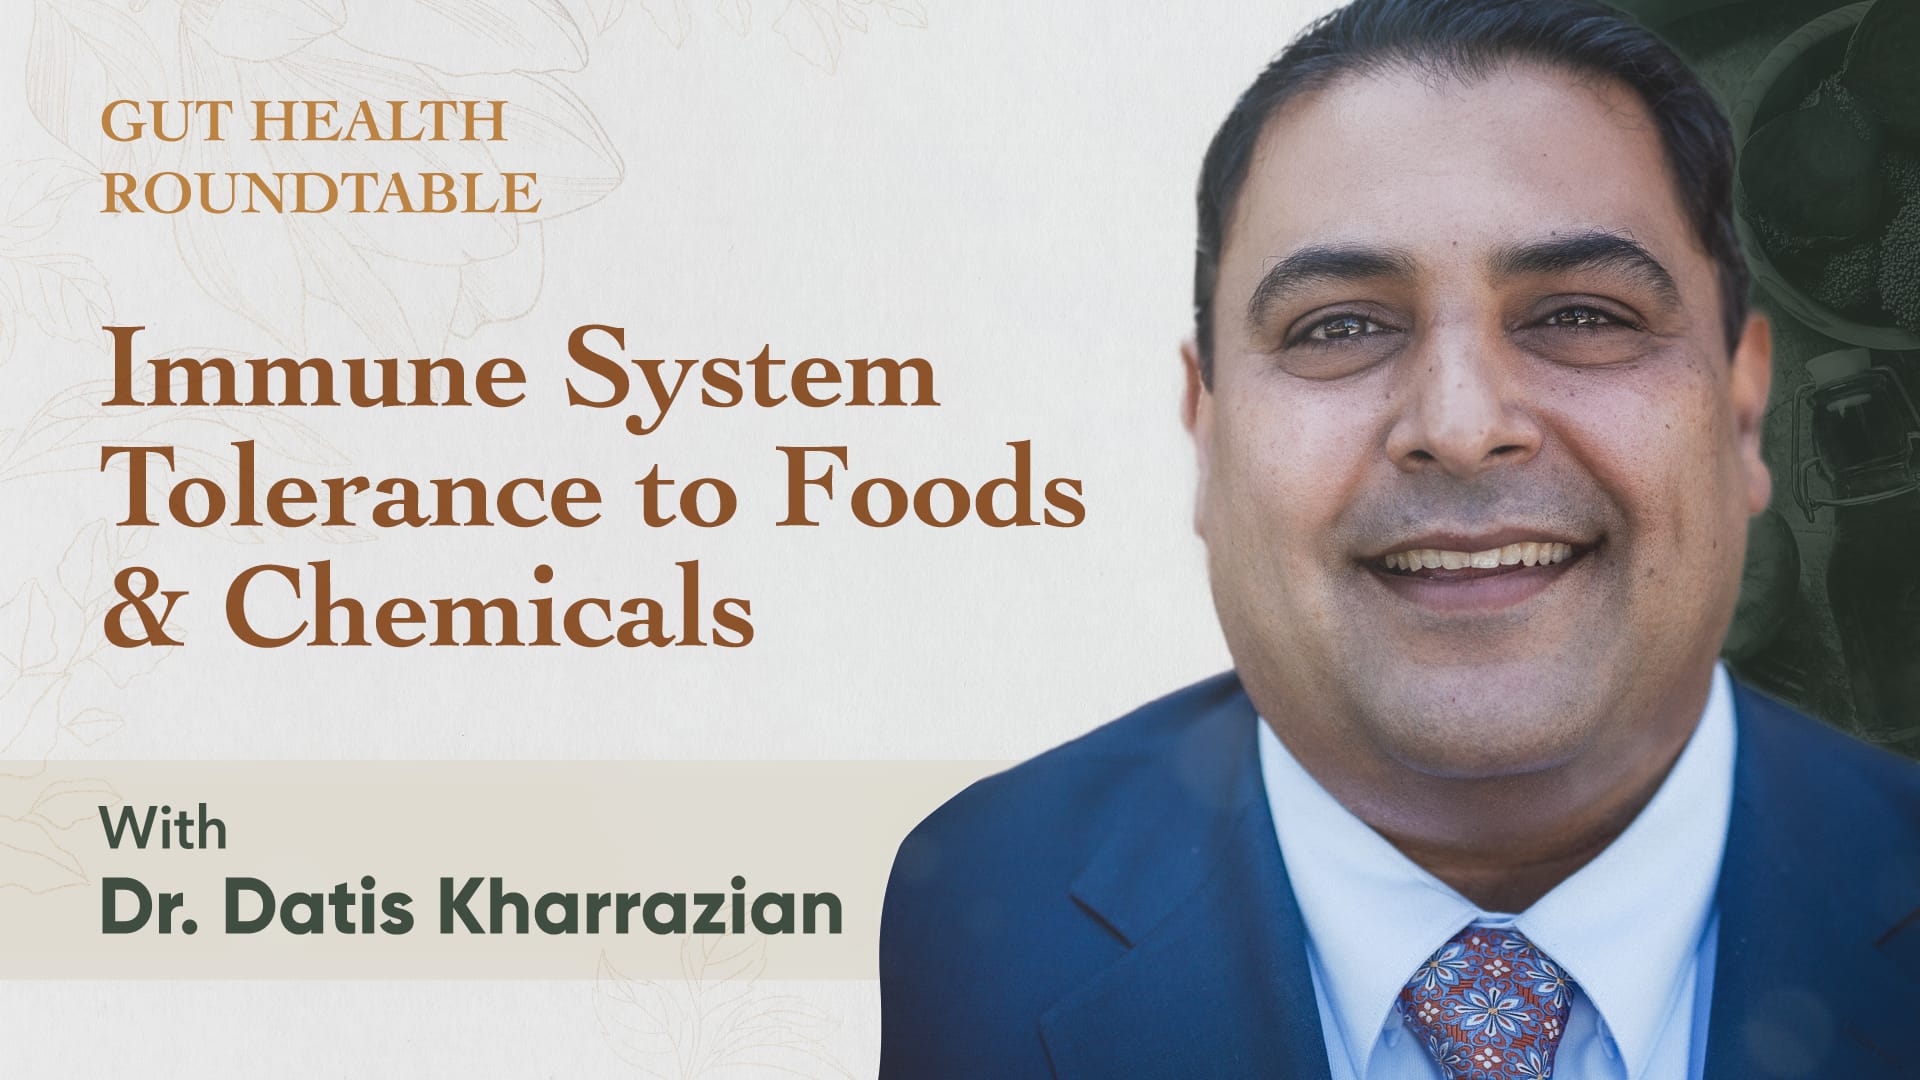 Immune System Tolerance to Foods & Chemicals